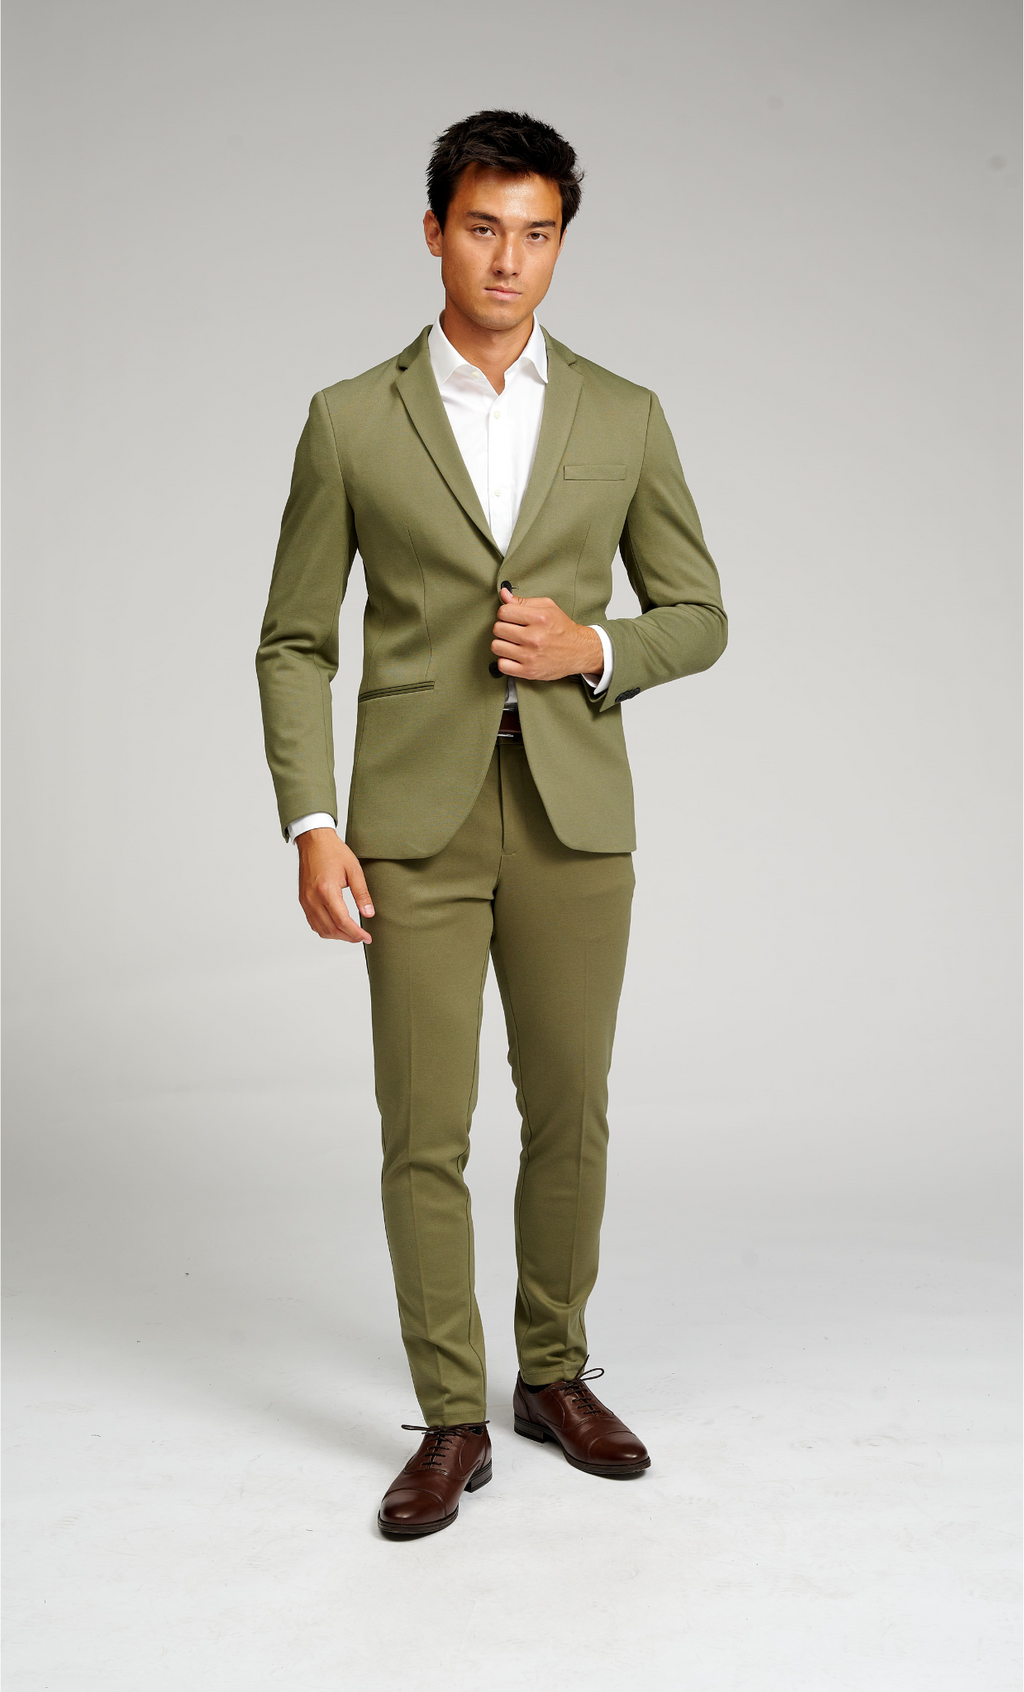 The Original Performance Suit (Olive) - Package Deal